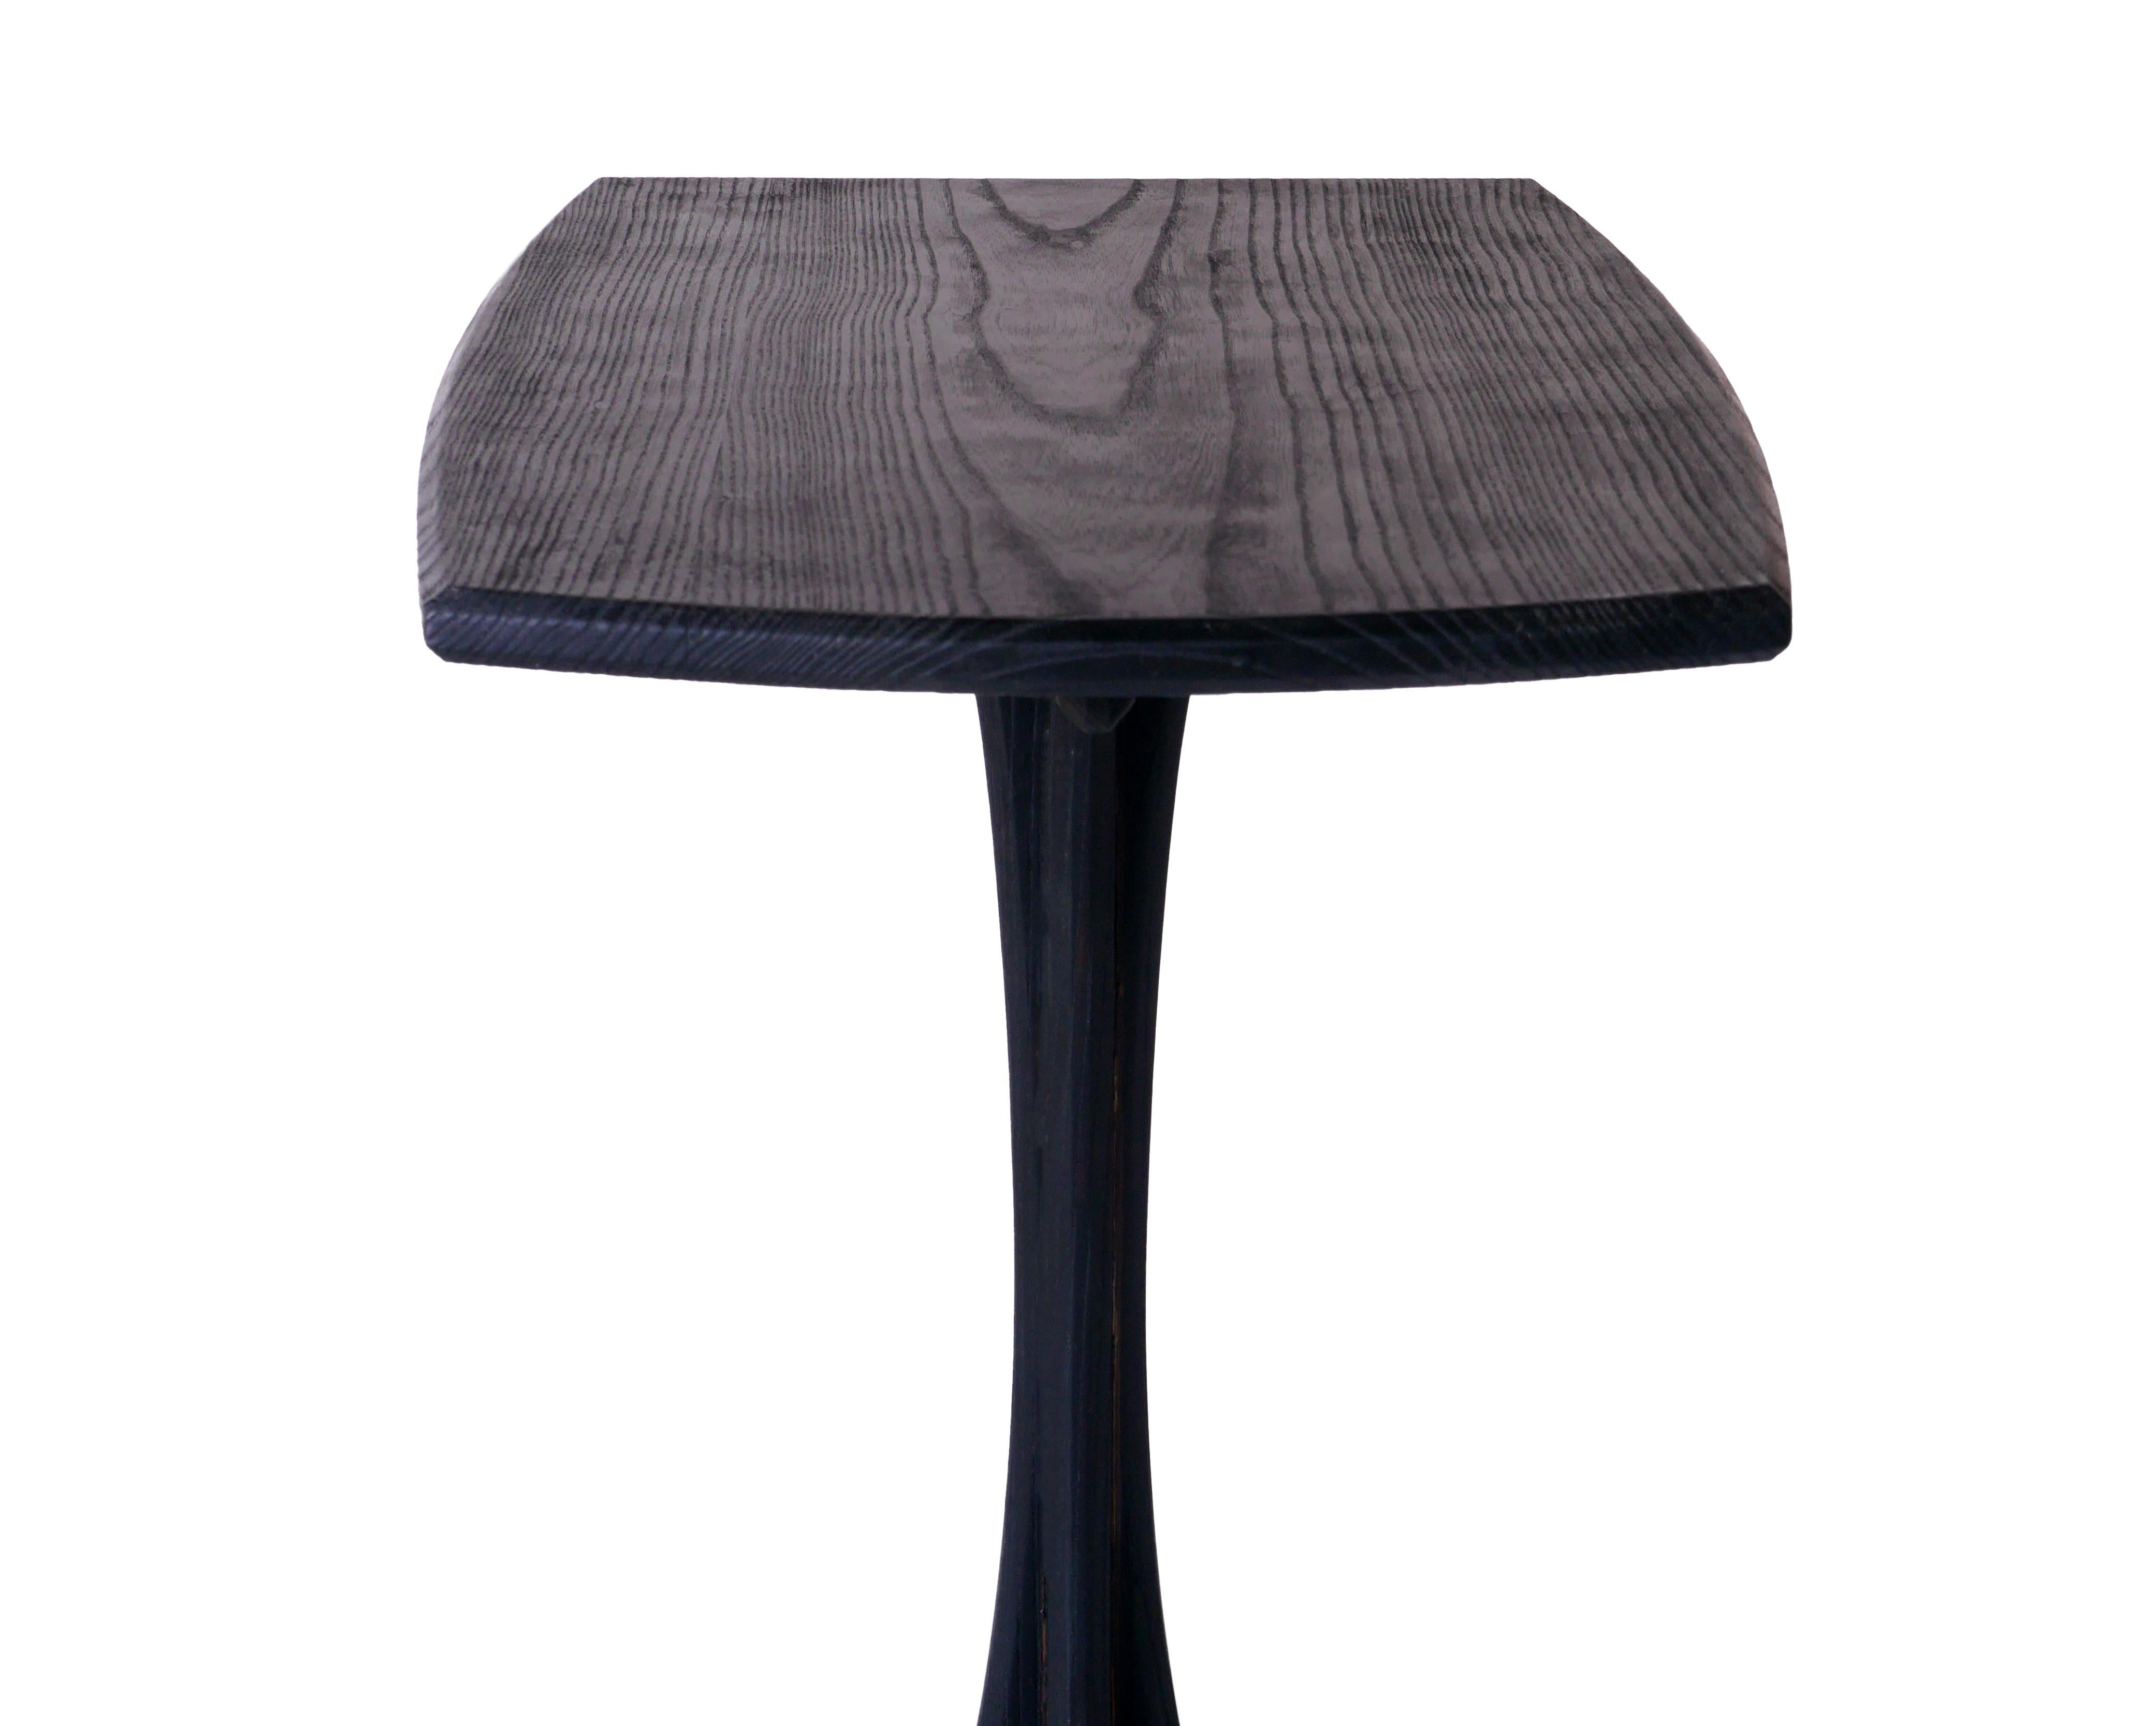 Modern Burnt Ash Plume Side Table, Contemporary Handmade Pedestal End Table by Arid For Sale